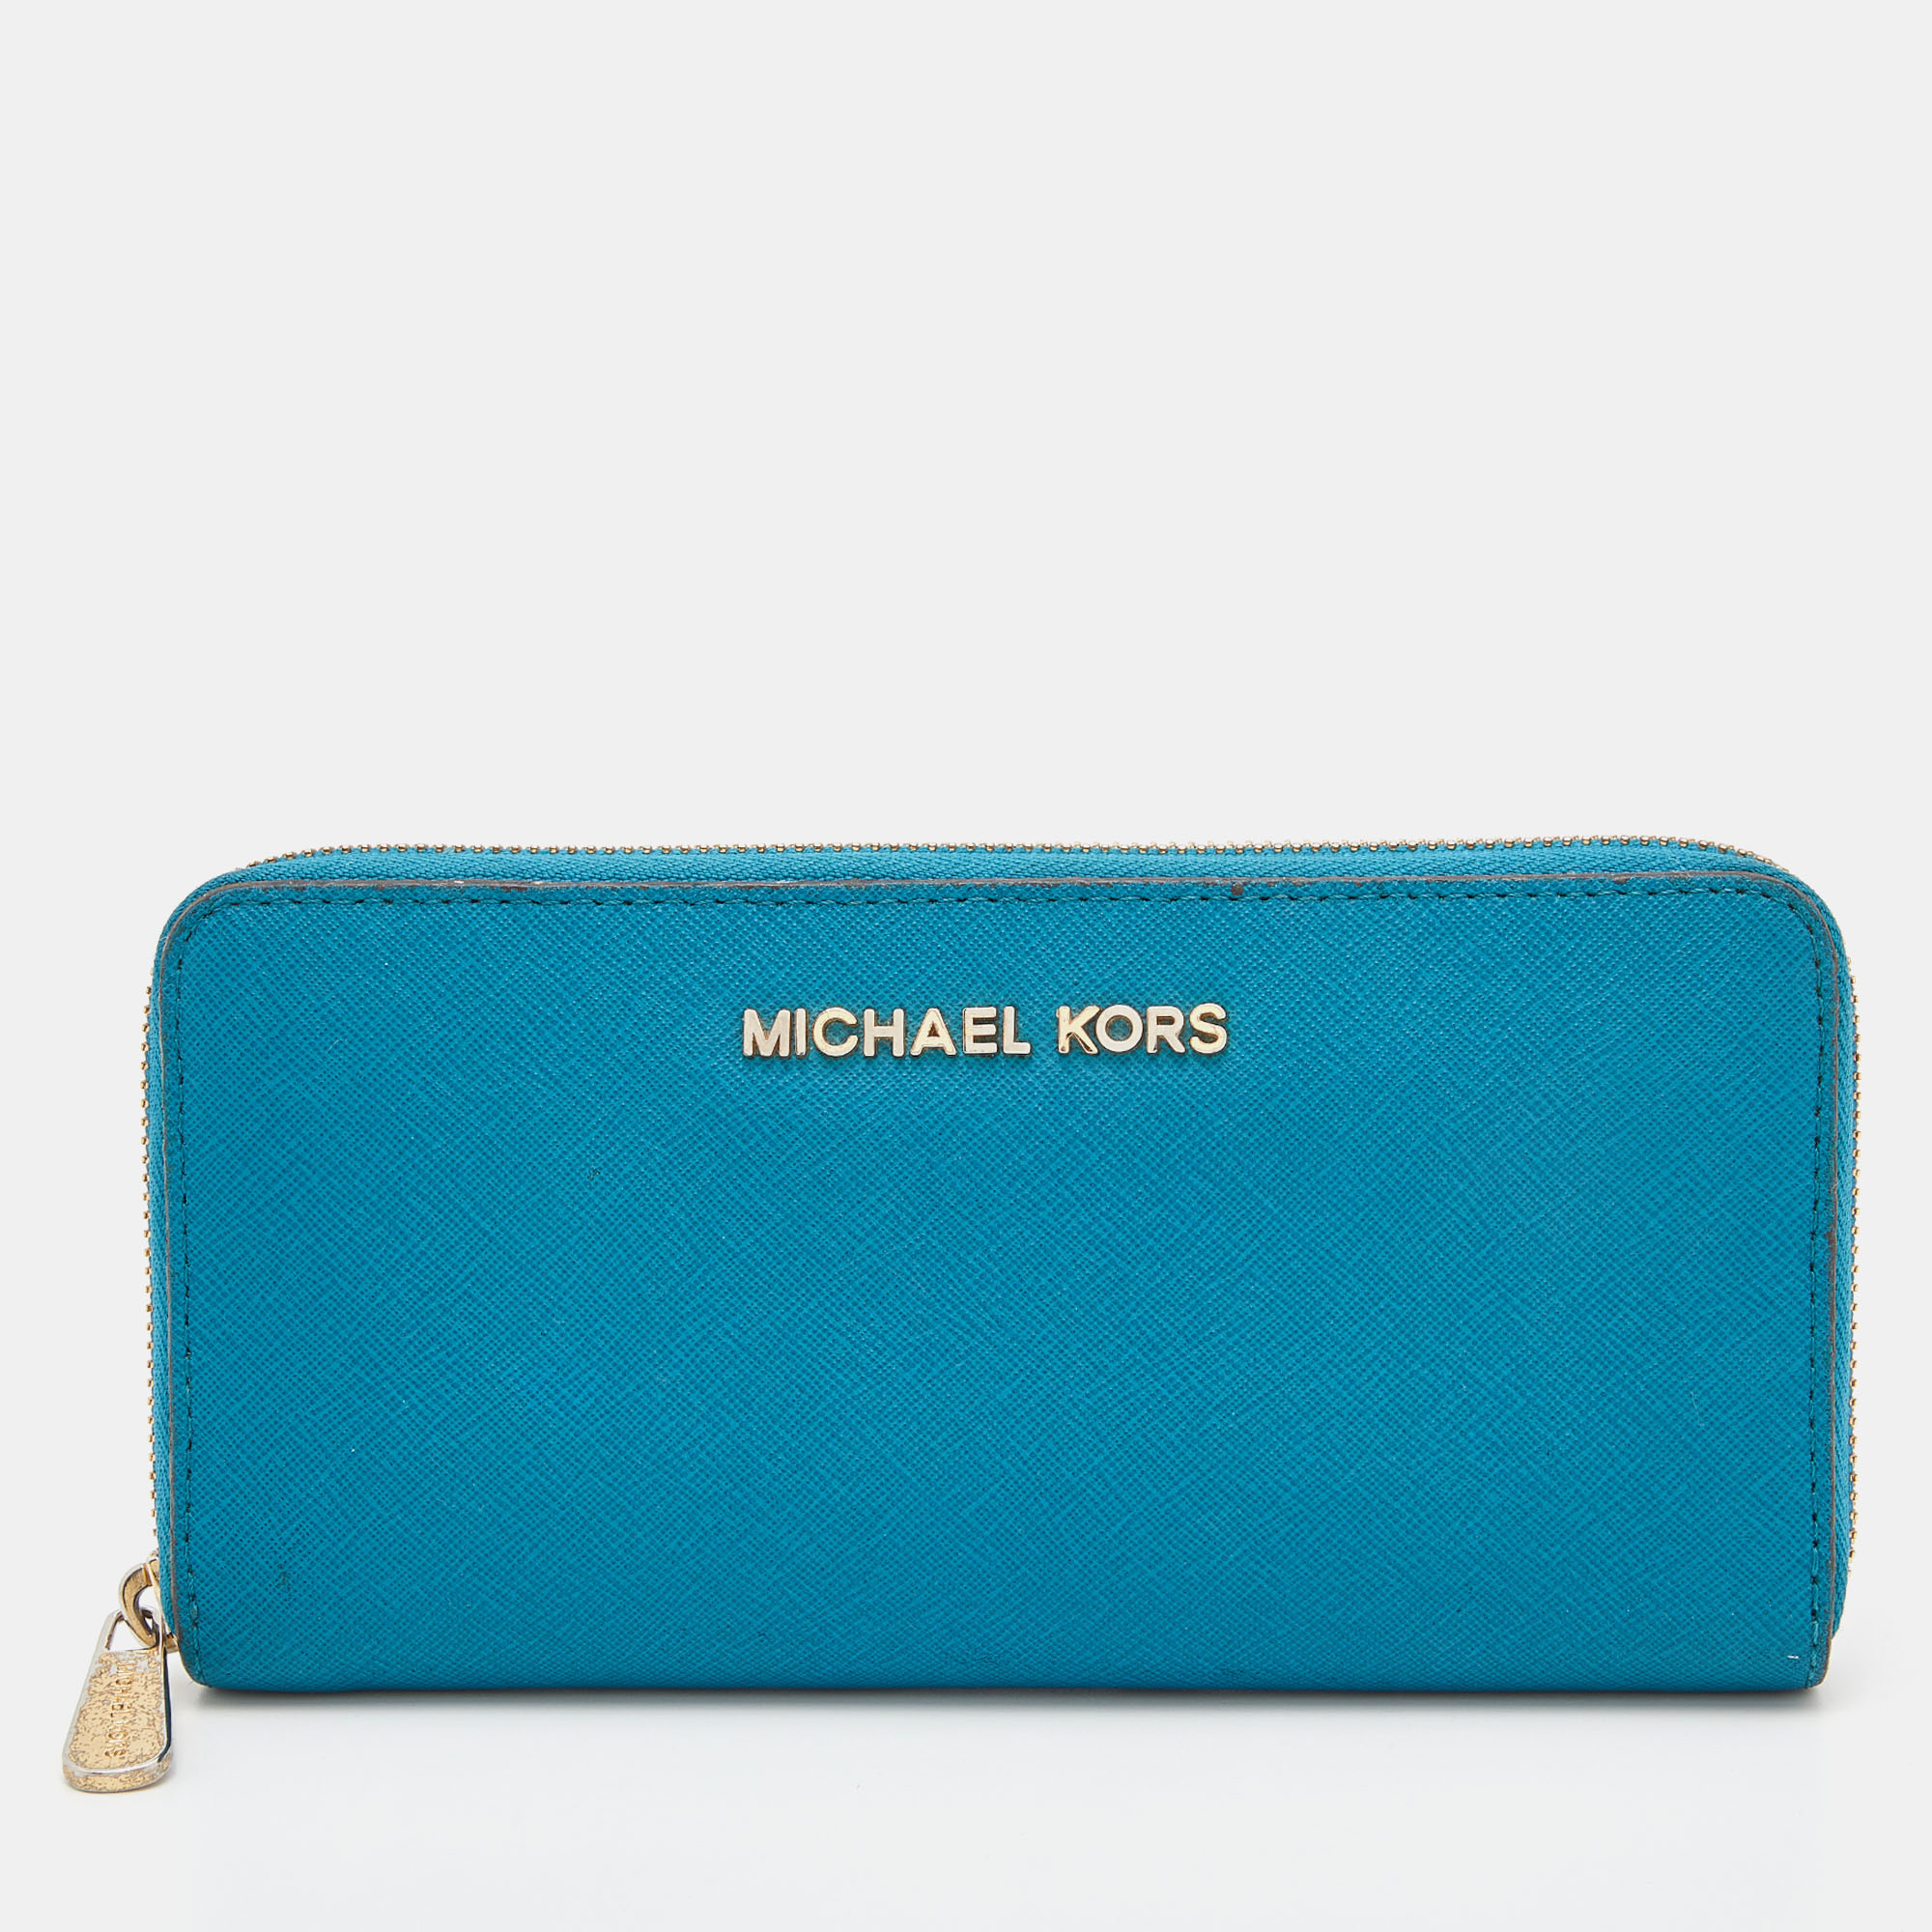 Pre-owned Michael Kors Blue Leather Jet Set Zip Around Wallet